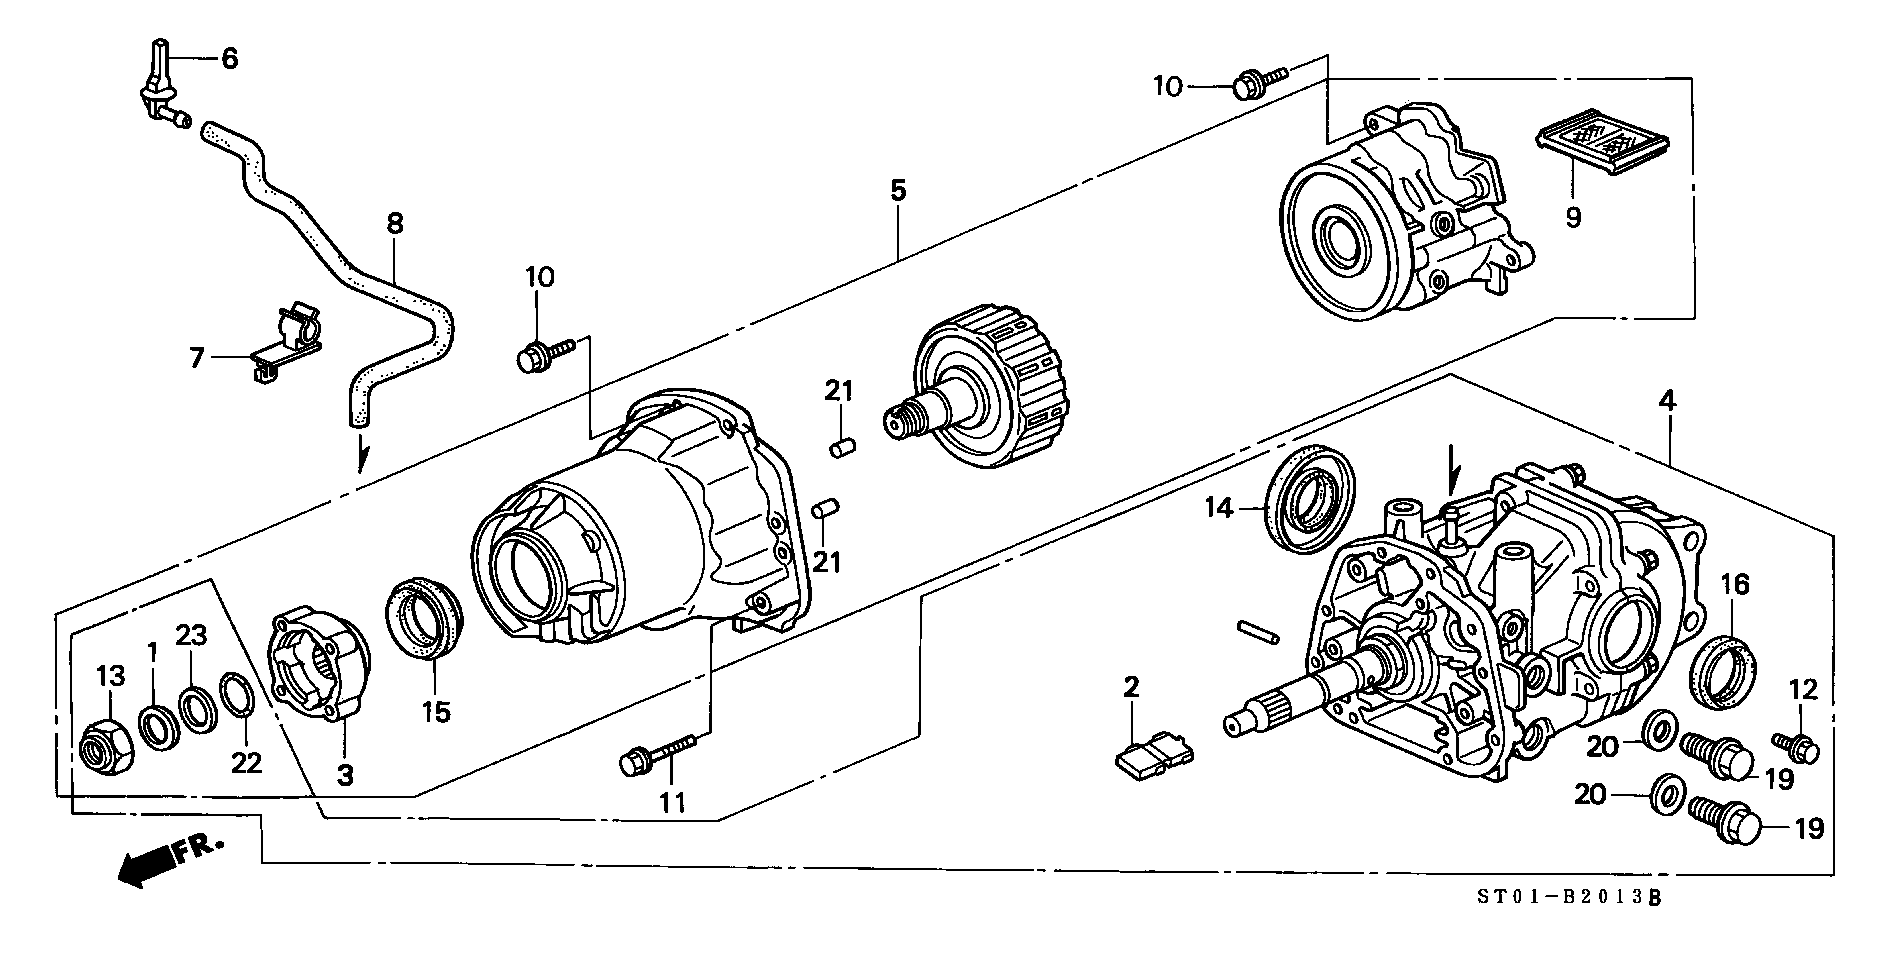 REAR DIFFERENTIAL(MA6:120)